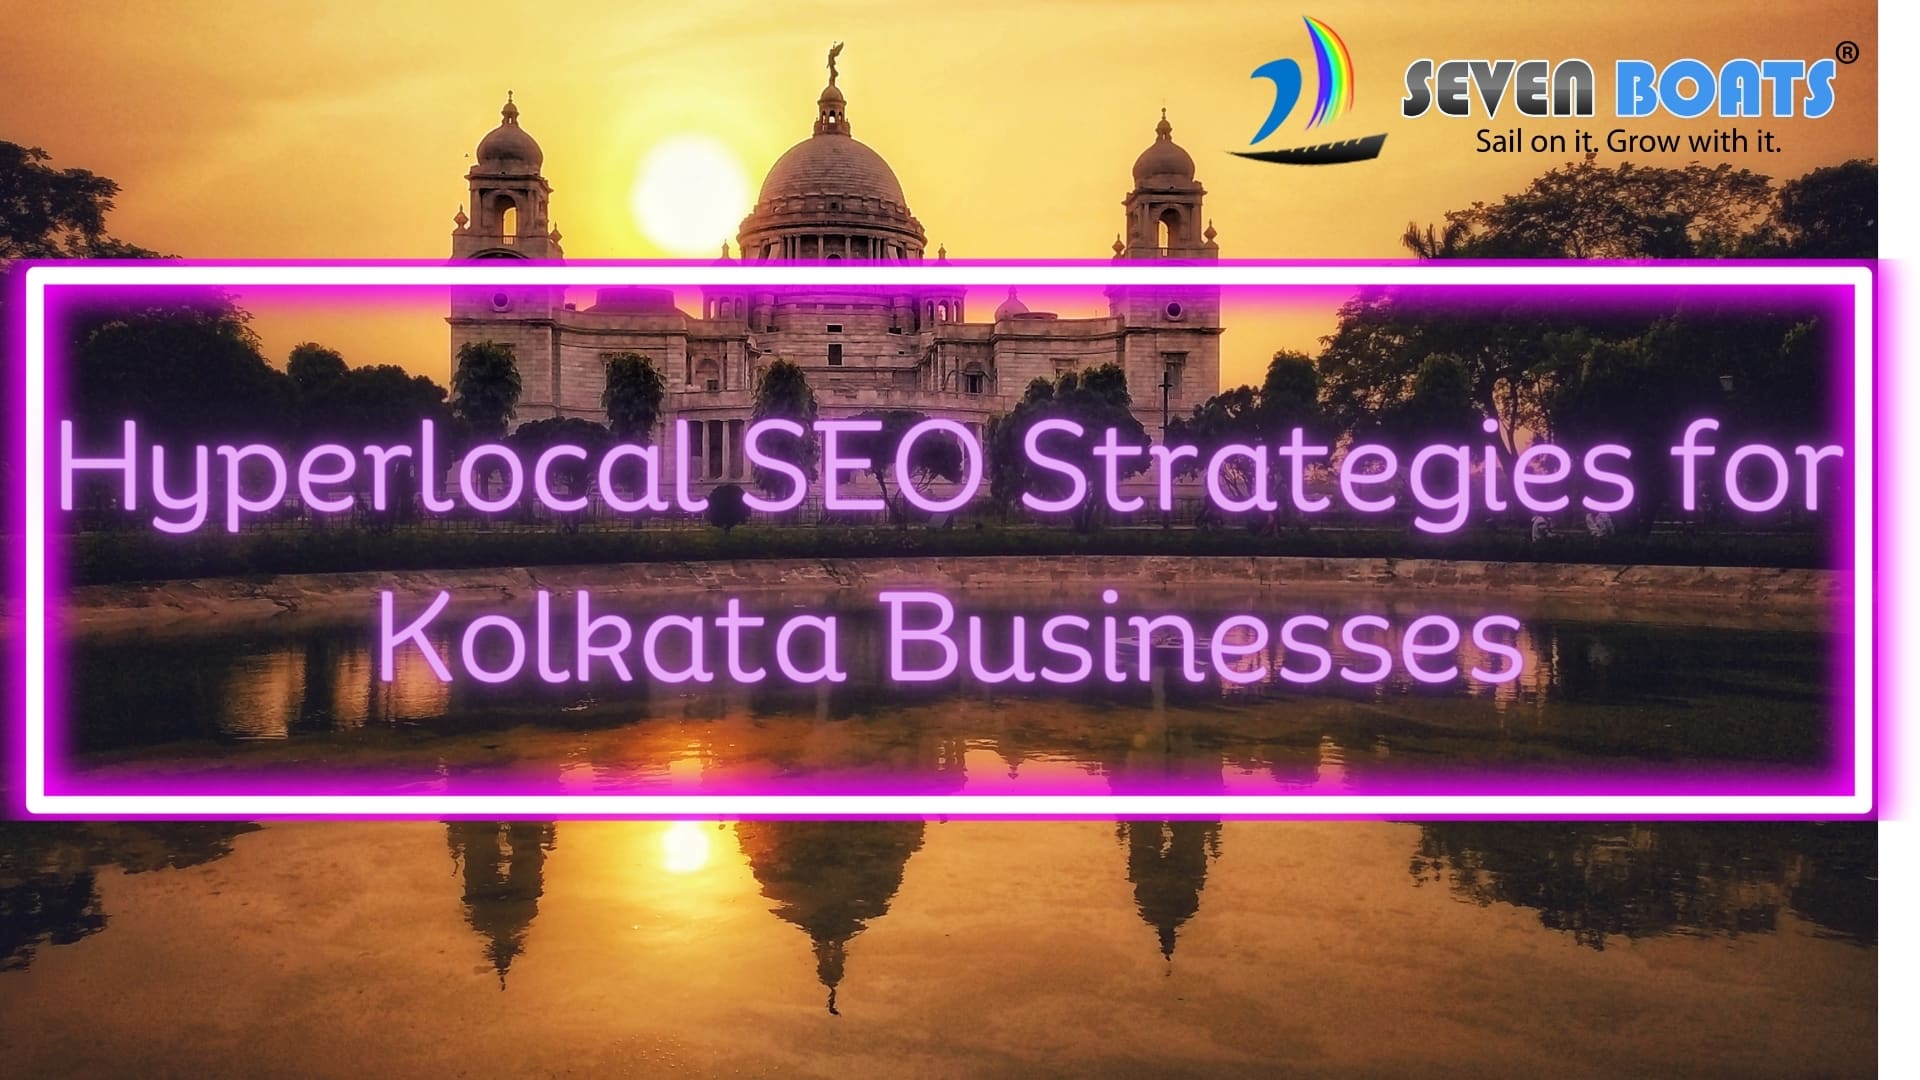 Hyperlocal SEO Strategies for Kolkata Businesses - a building with a purple border